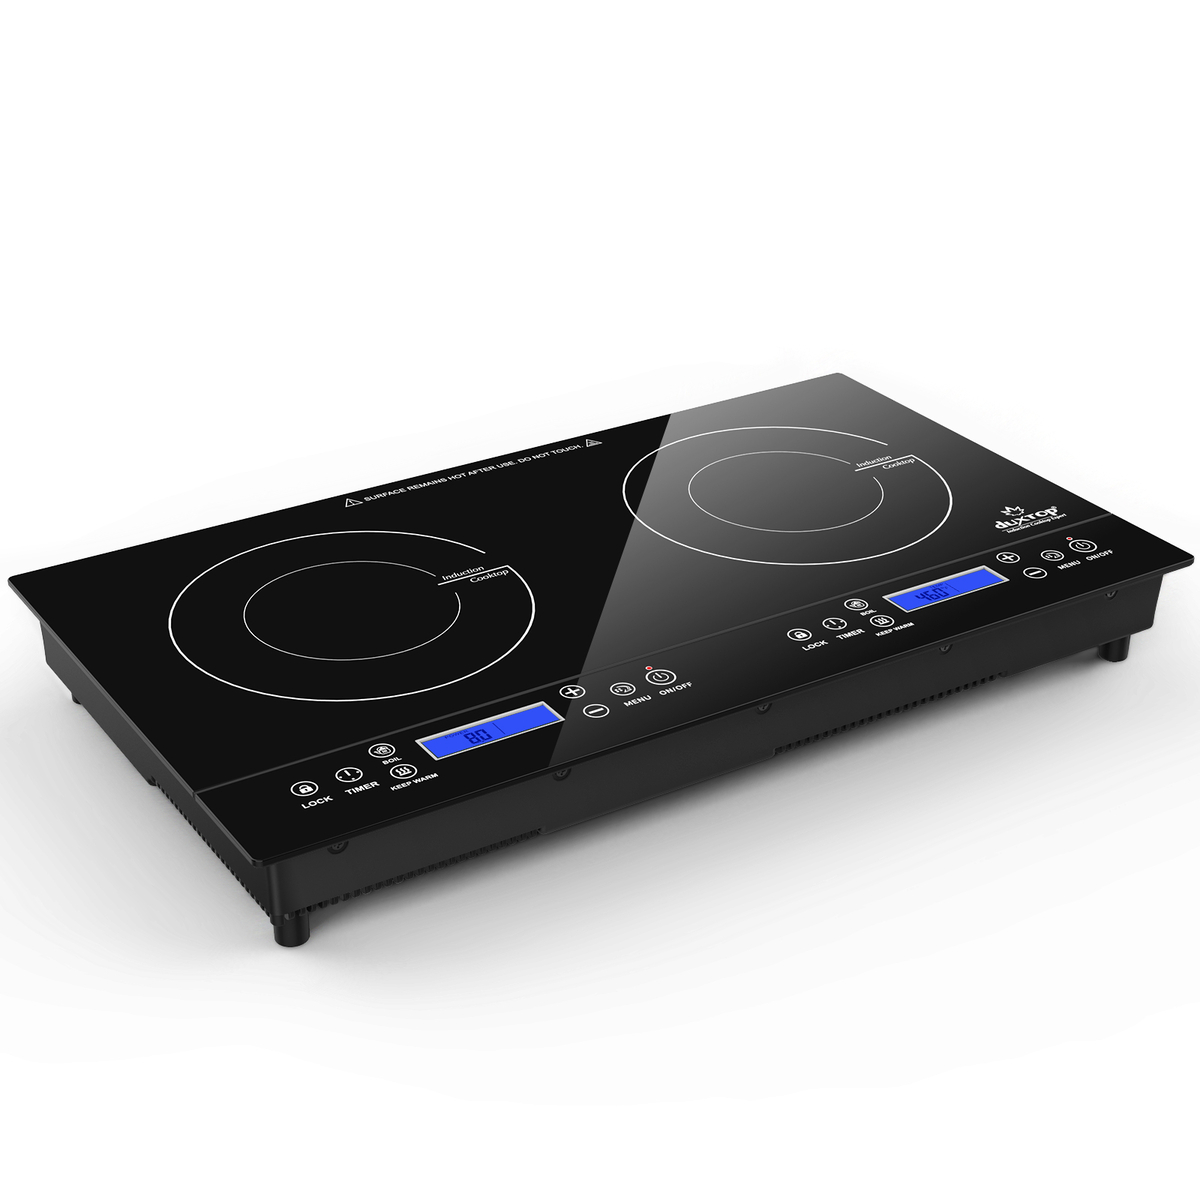 Mueller RapidTherm Portable Induction Cooktop Hot Plate Countertop Burner 1800W 8 Temp Levels Timer Auto-Shut-Off Touch Panel LED Display Auto